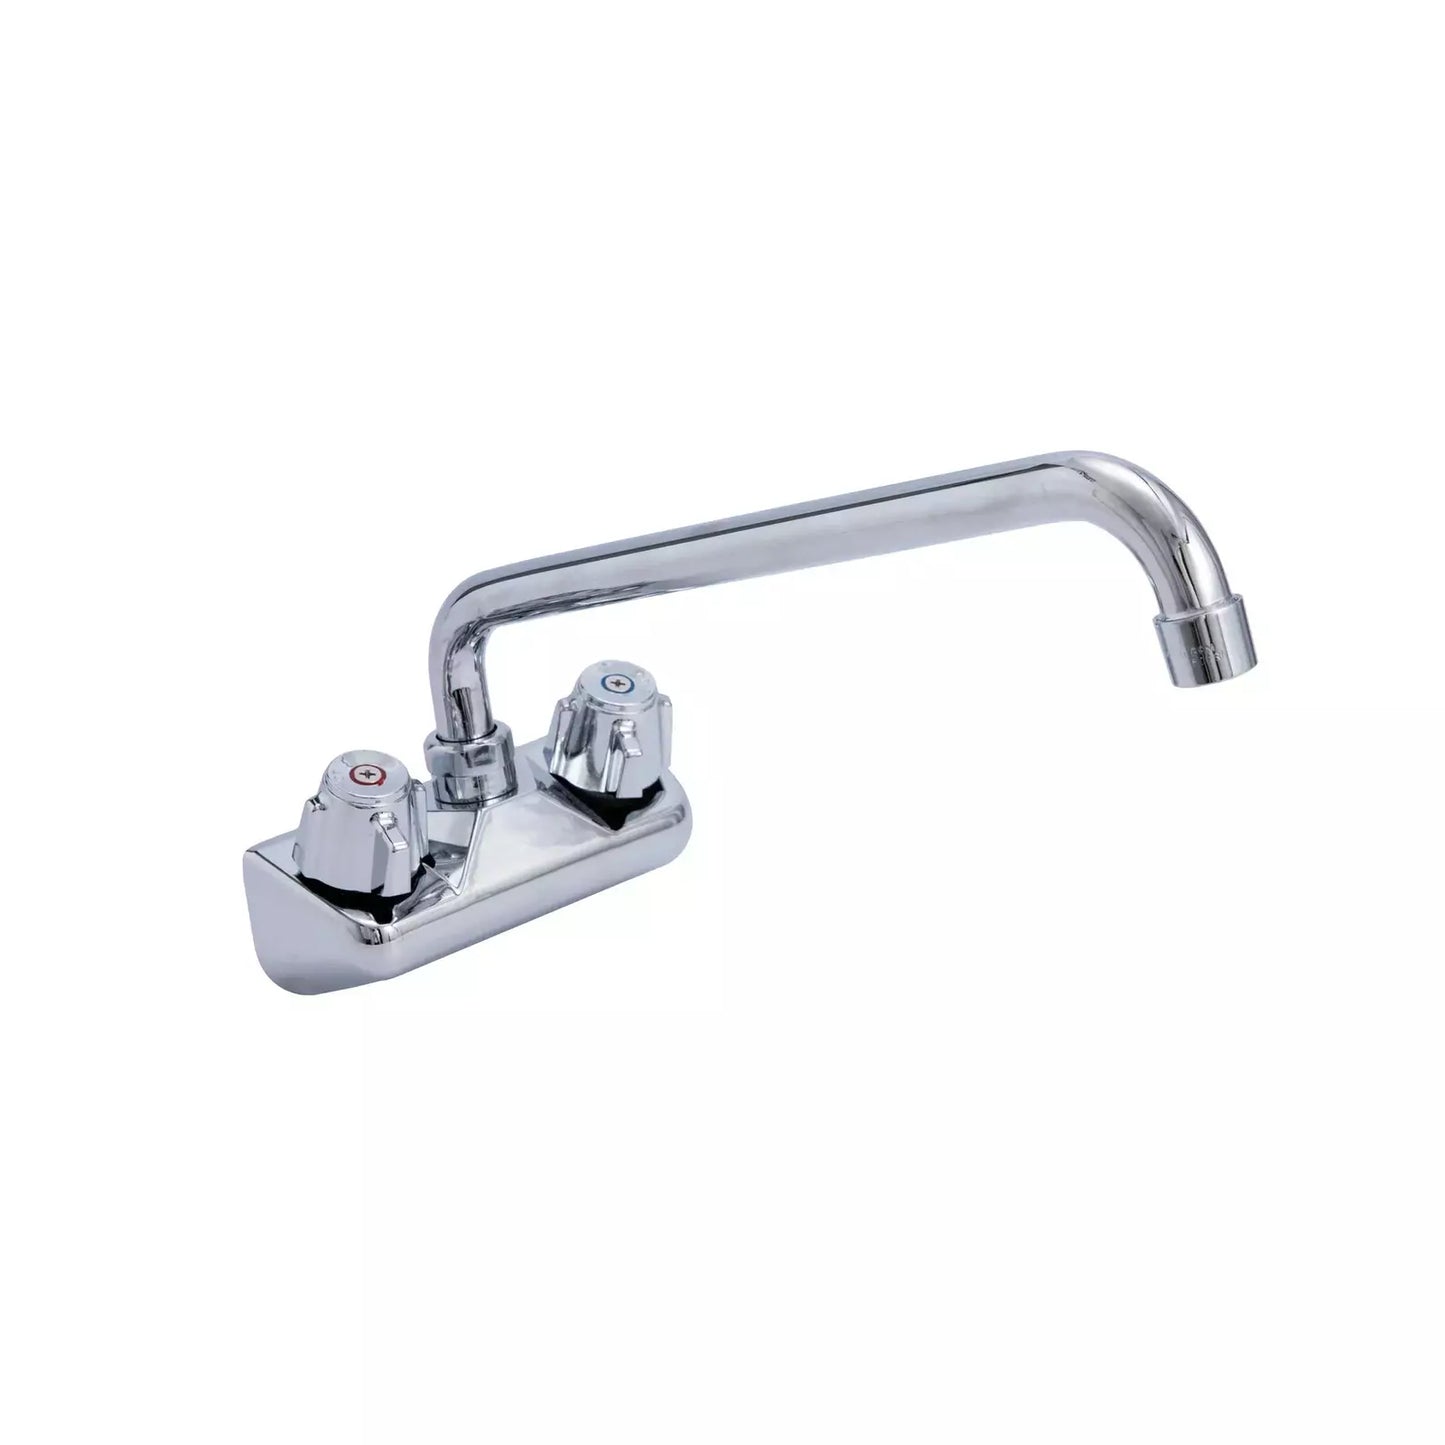 KCS DELWF-W412 4" Center Wall Mount Sink Faucet with 12" Swing Spout